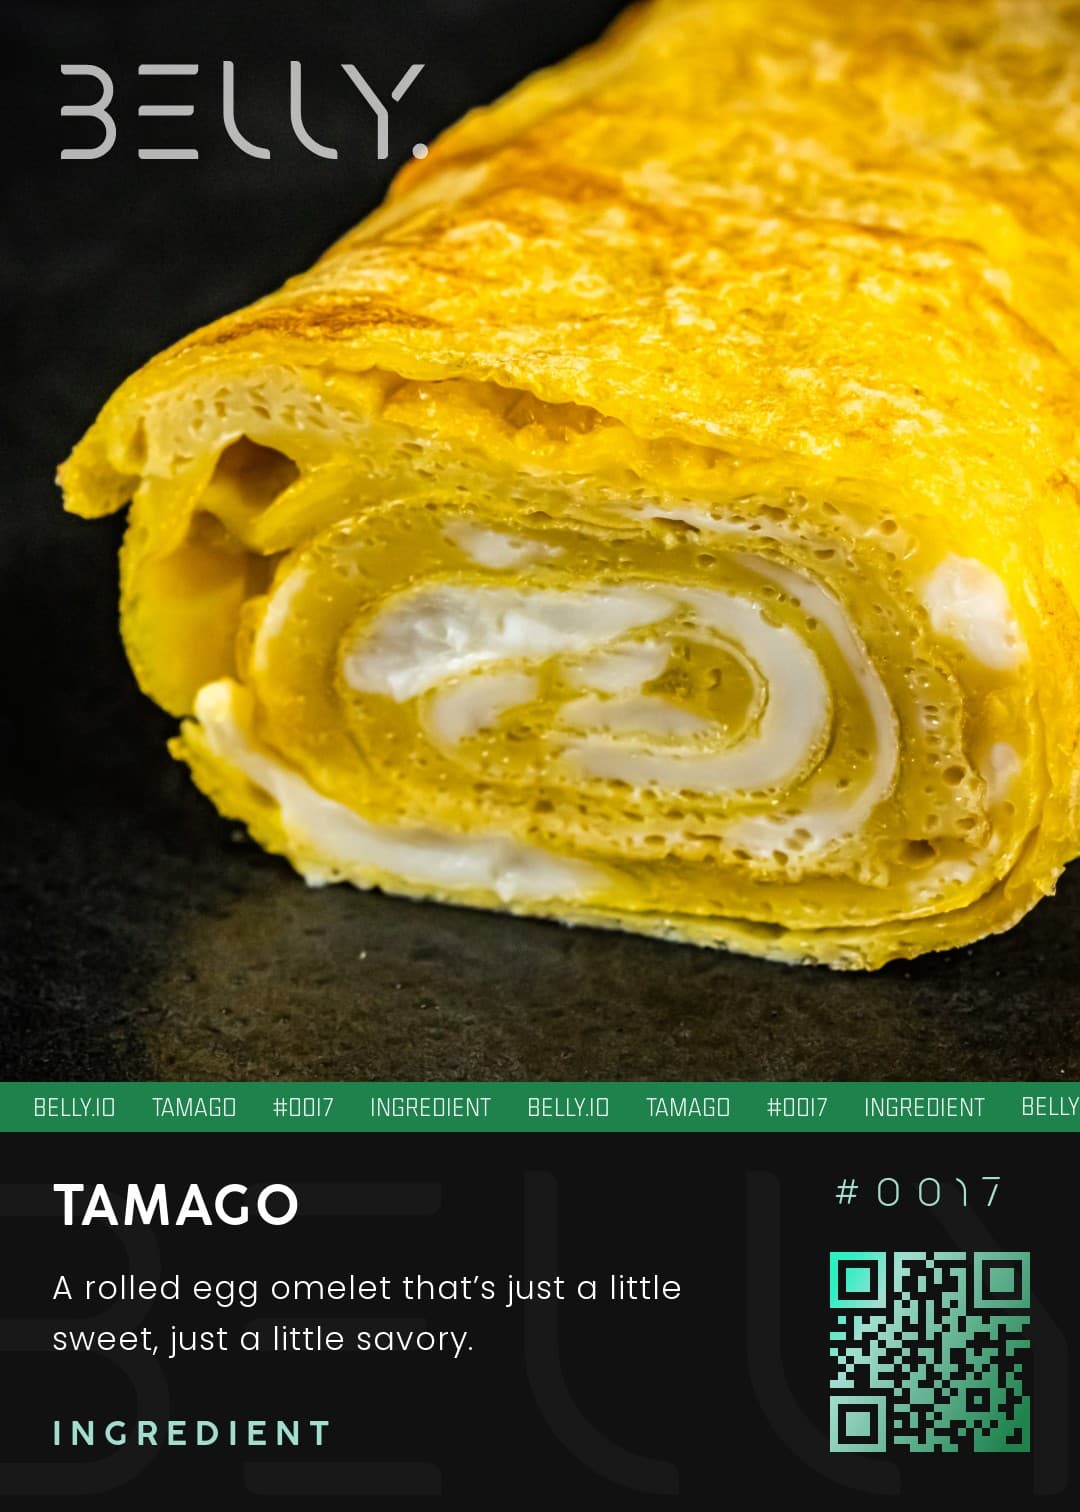 Tamago - A rolled egg omelet that’s just a little sweet, just a little savory.